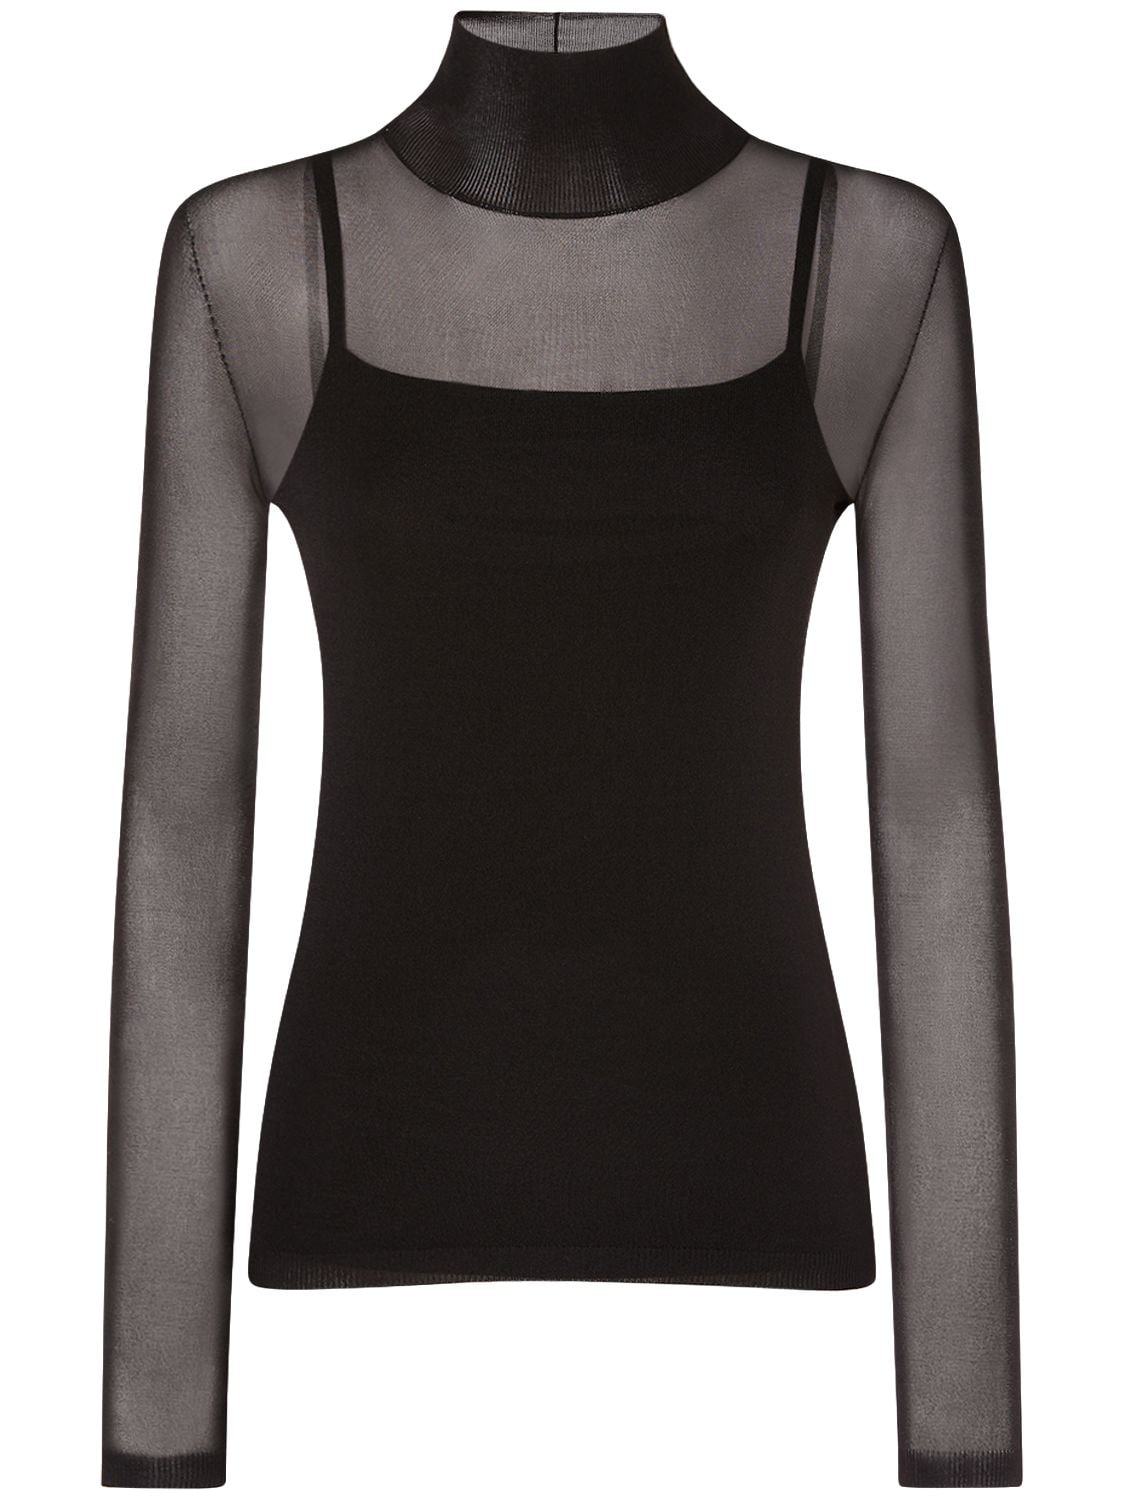 Image of Fatuo Jersey L/s Knit Top W/ Tank Top